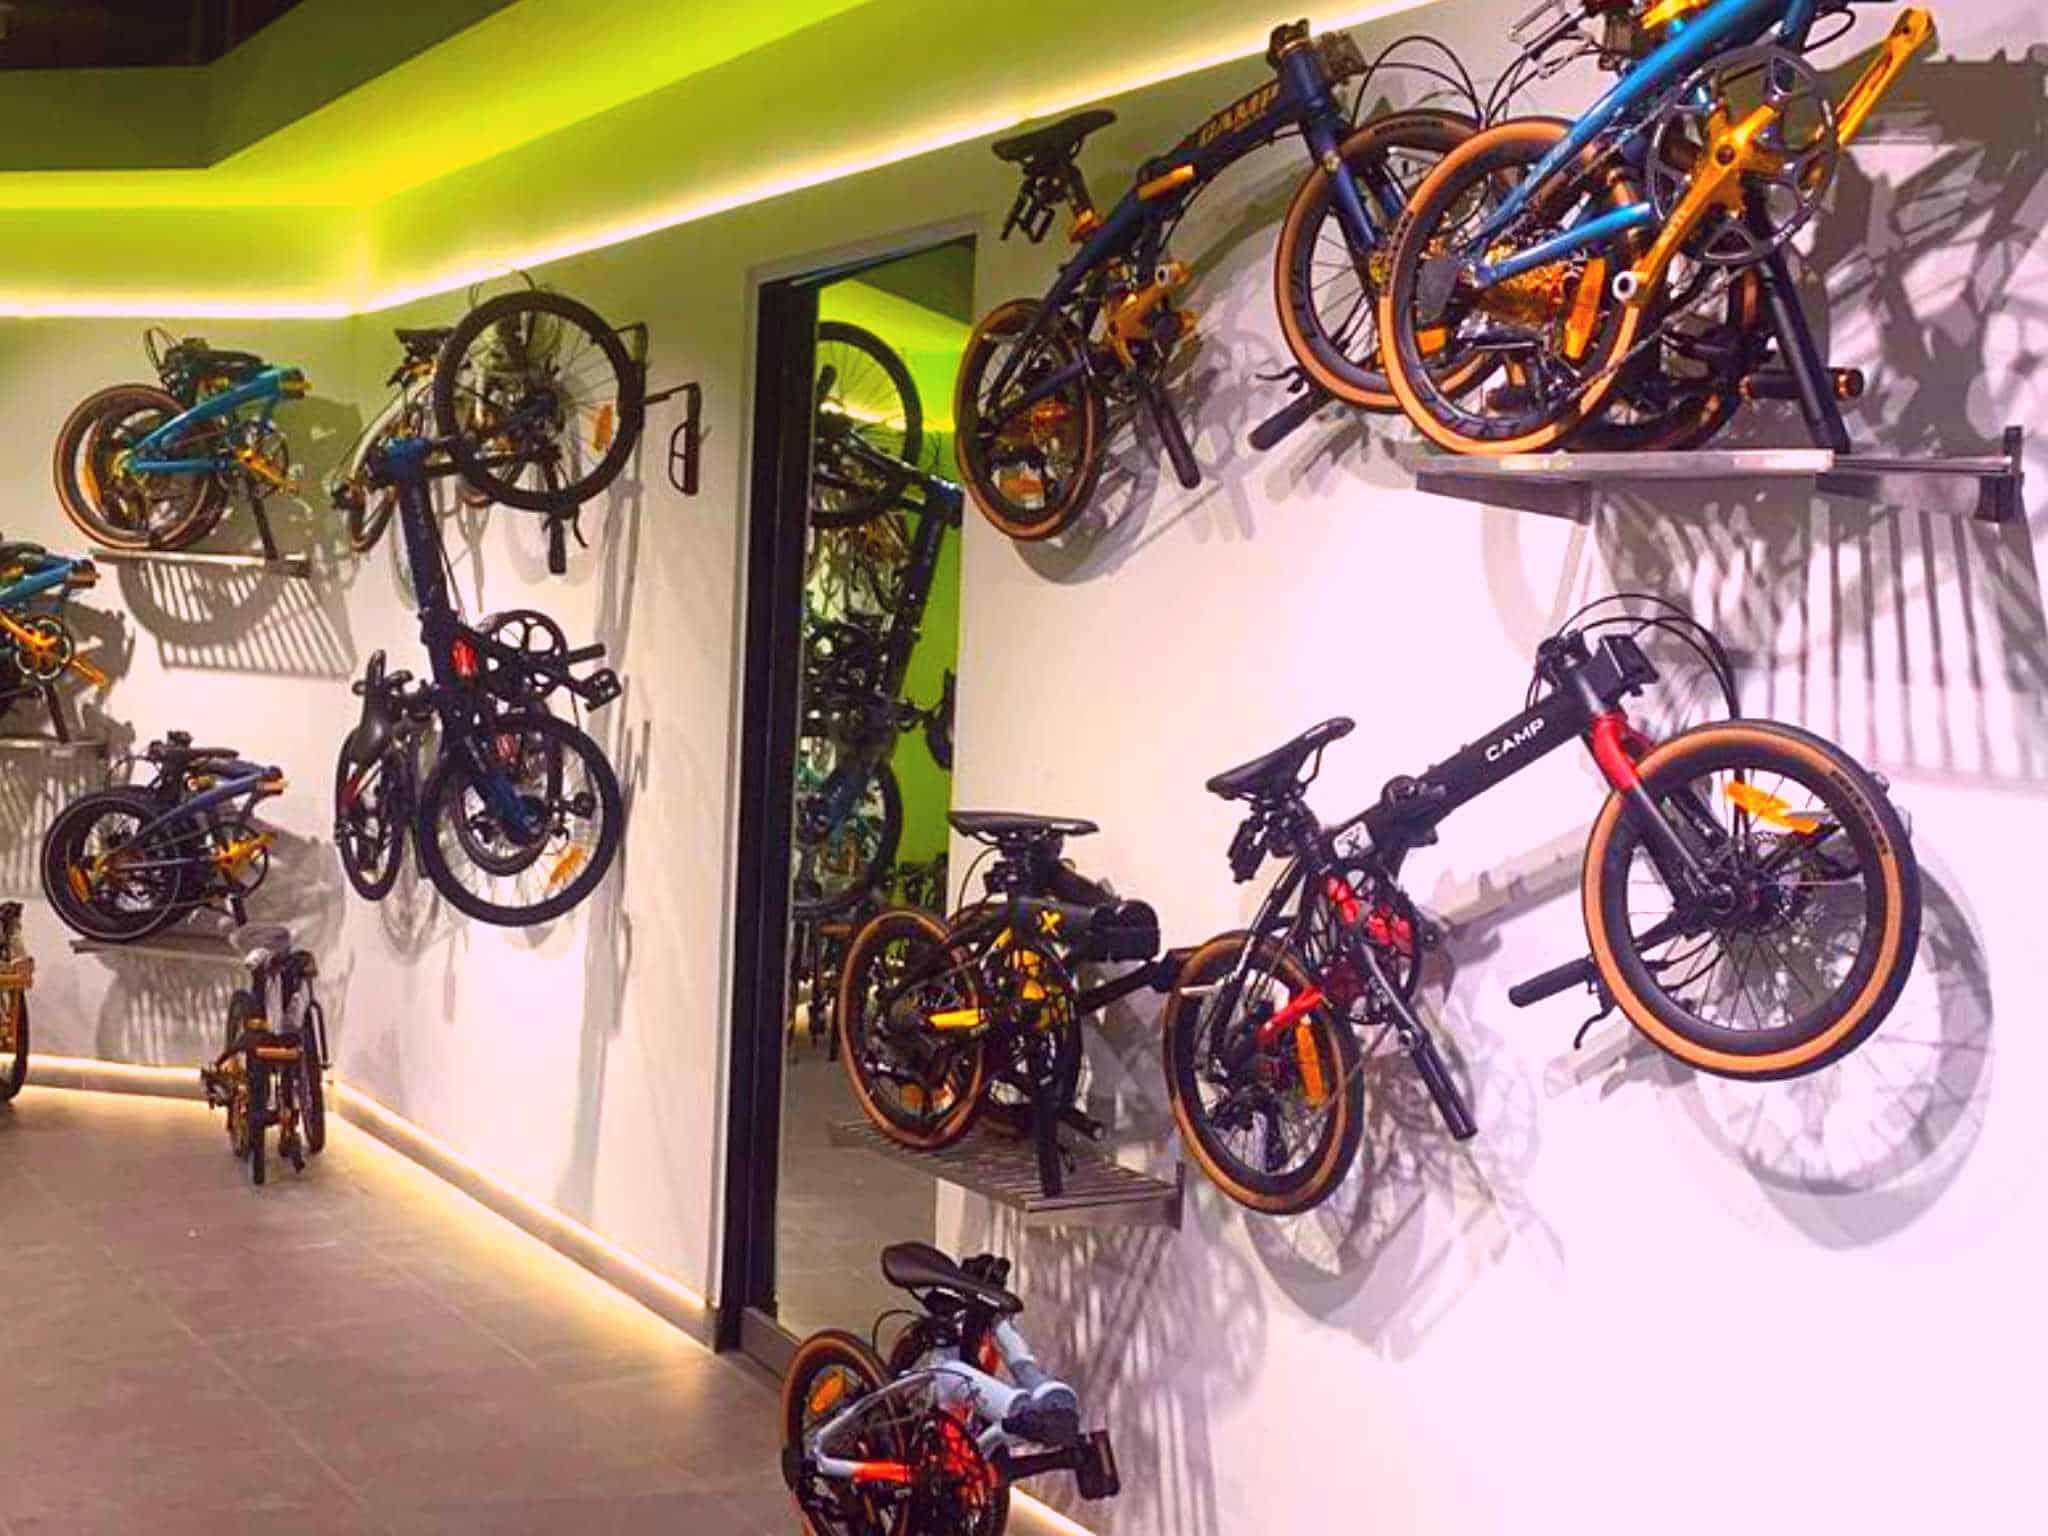 ROYALE by MOBOT at Bedok Mall bicycles - Press release: MOBOT x ROYALE Opens Bicycle Shop In Bedok Mall